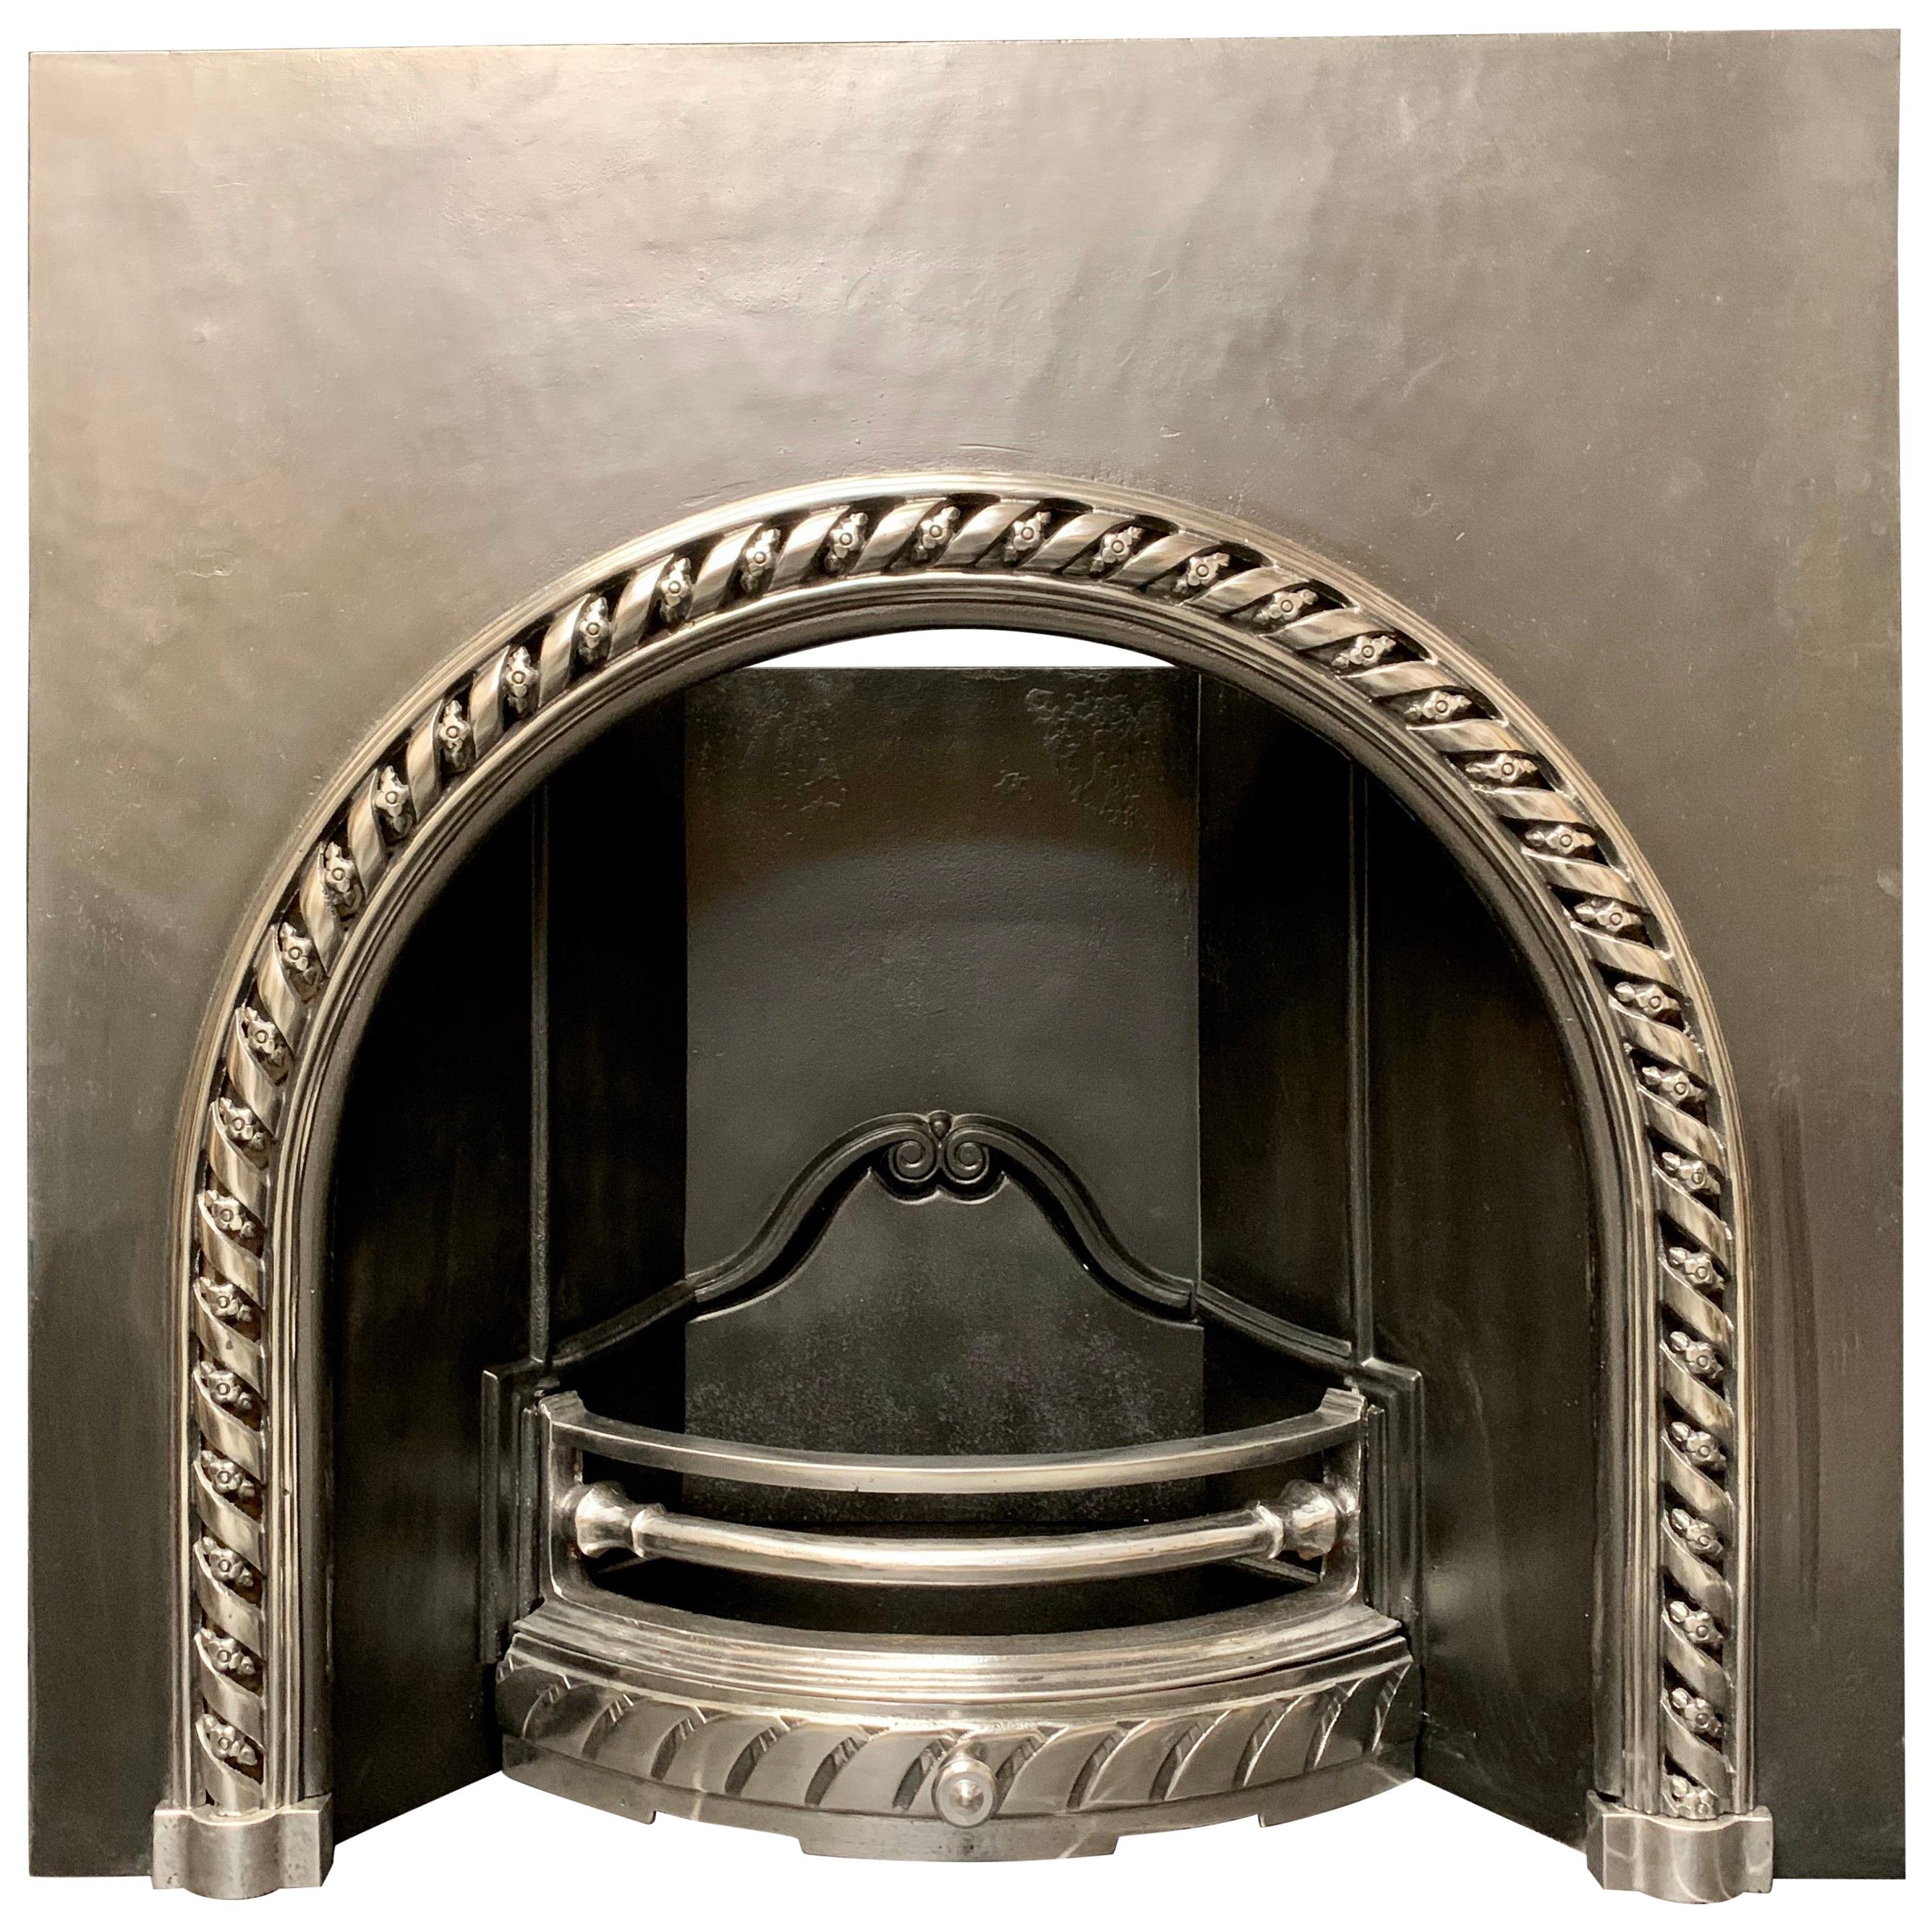 19th Century Victorian Style Arched Highlighted Cast Iron Fireplace Insert  For Sale at 1stDibs | arched fireplace insert, victorian style fireplace,  cast iron arched fireplace insert